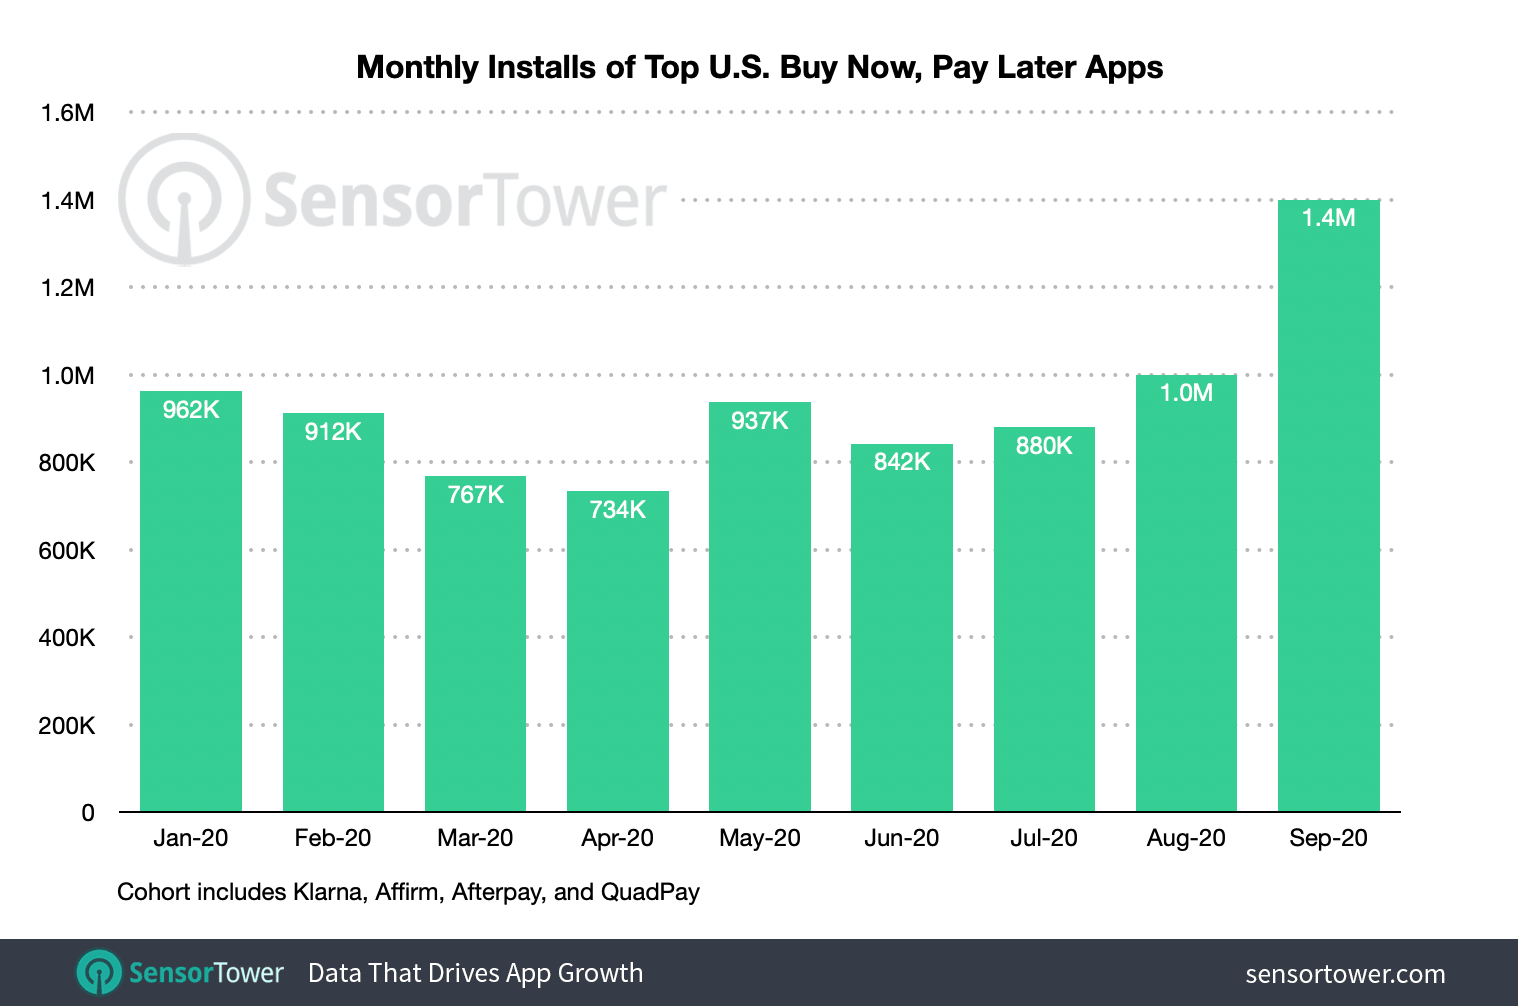 The top BNPL apps saw their installs grow month-over-month from July to September